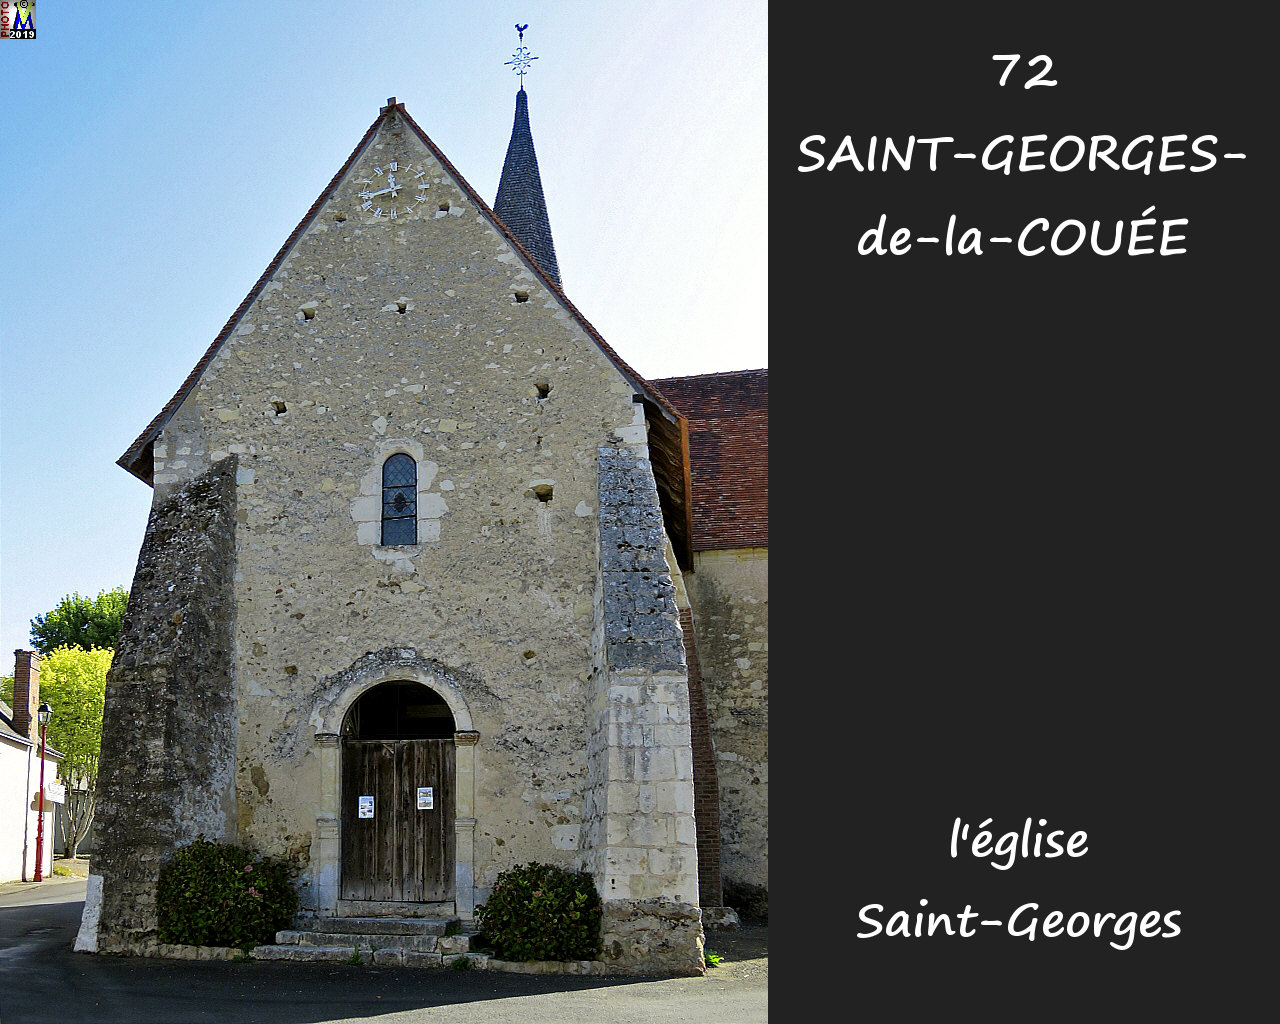 72StGEORGES-COUEE_eglise_104.jpg